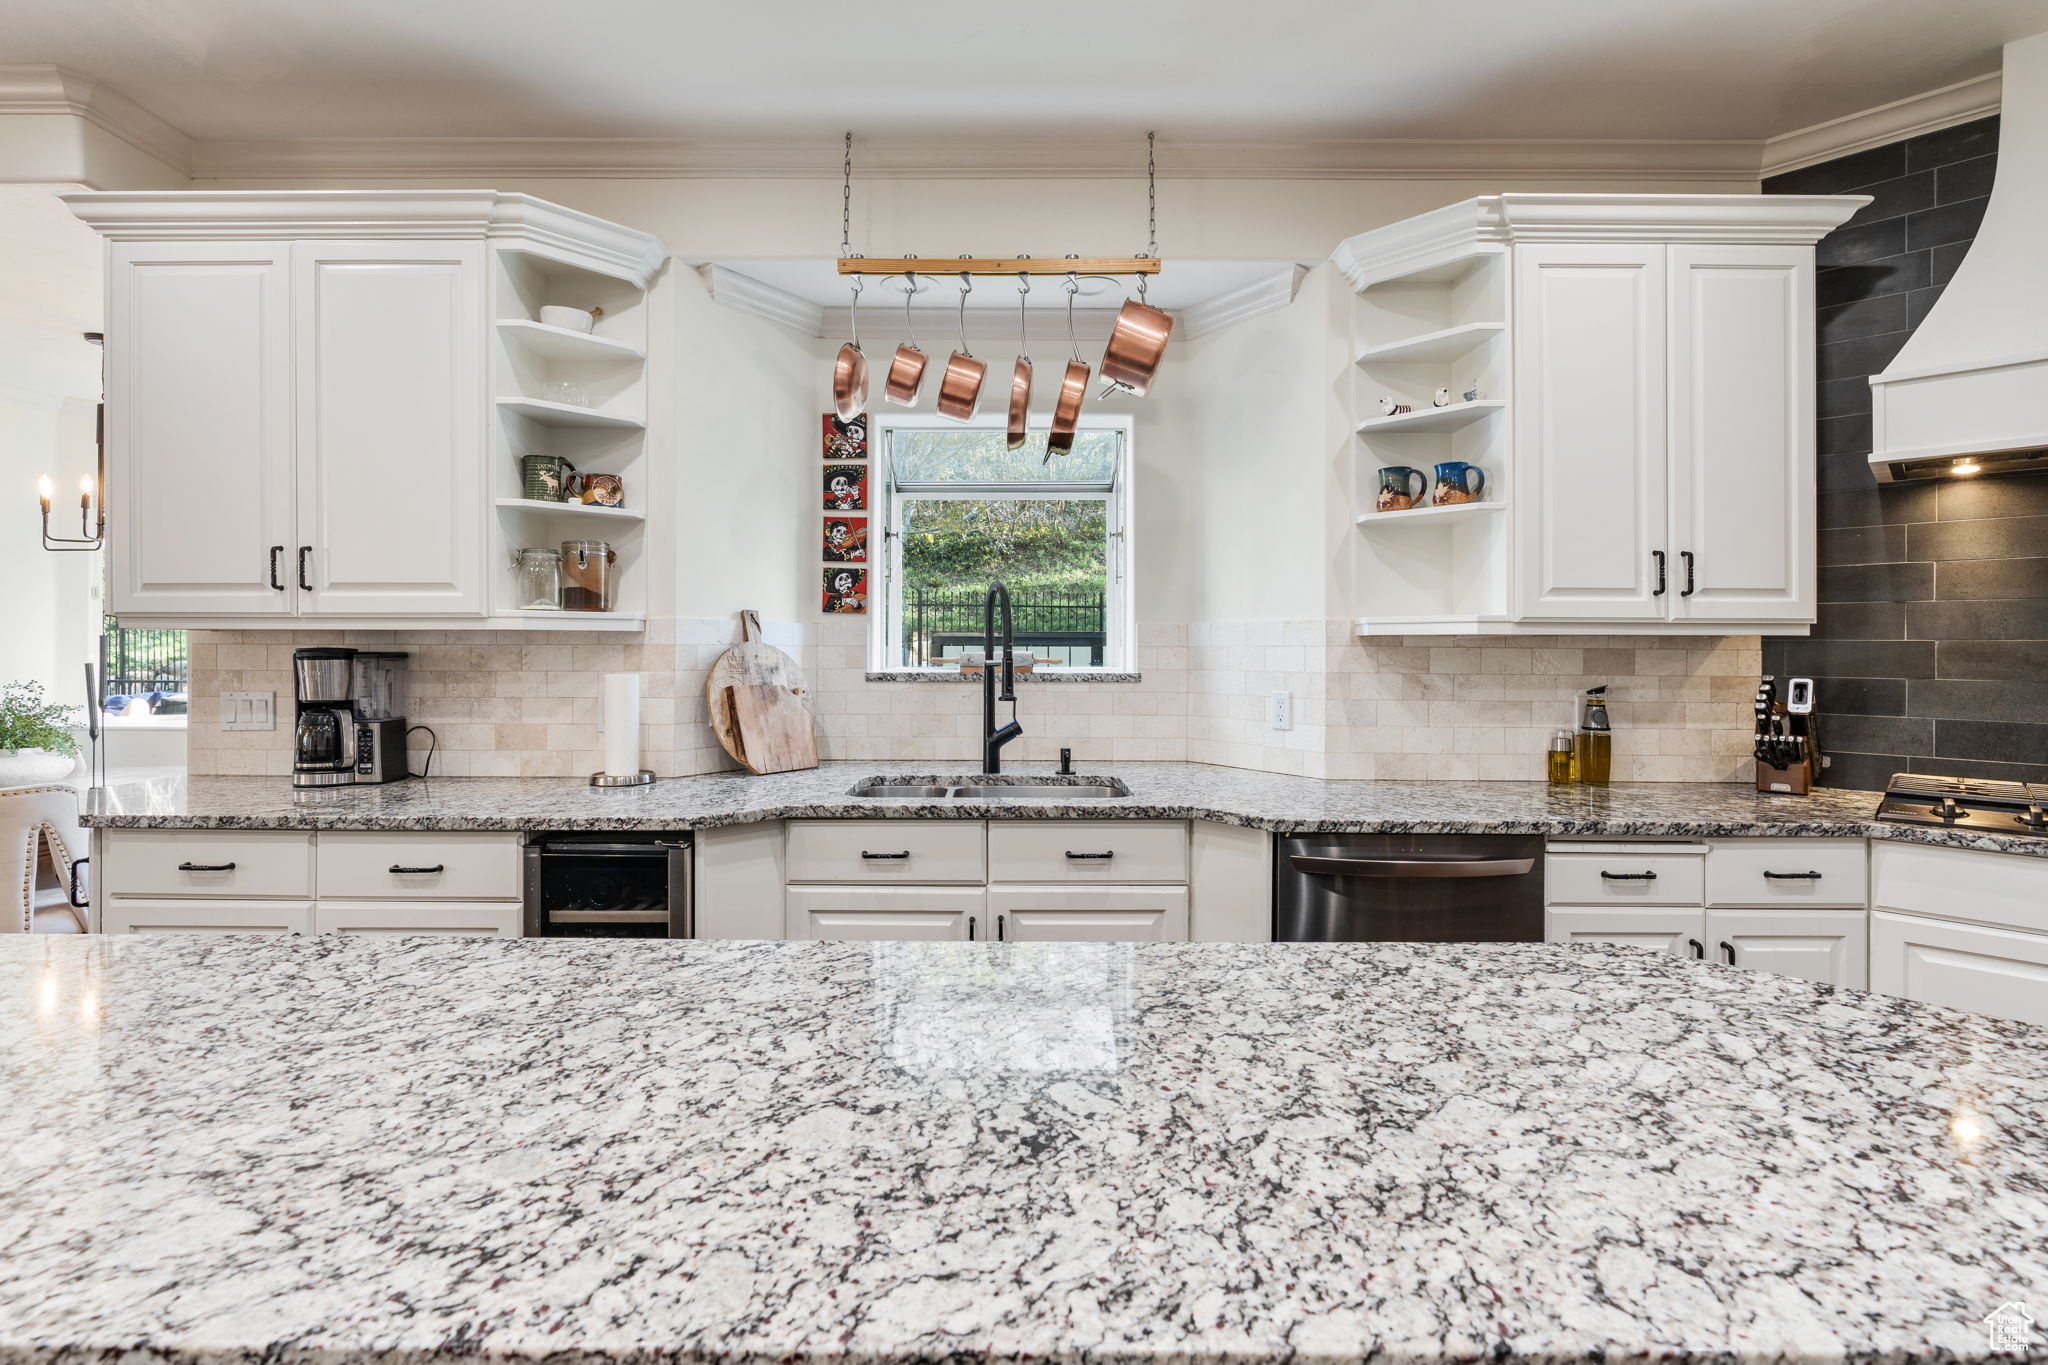 Kitchen featuring sink, tasteful backsplash, white cabinetry, and stainless steel appliances